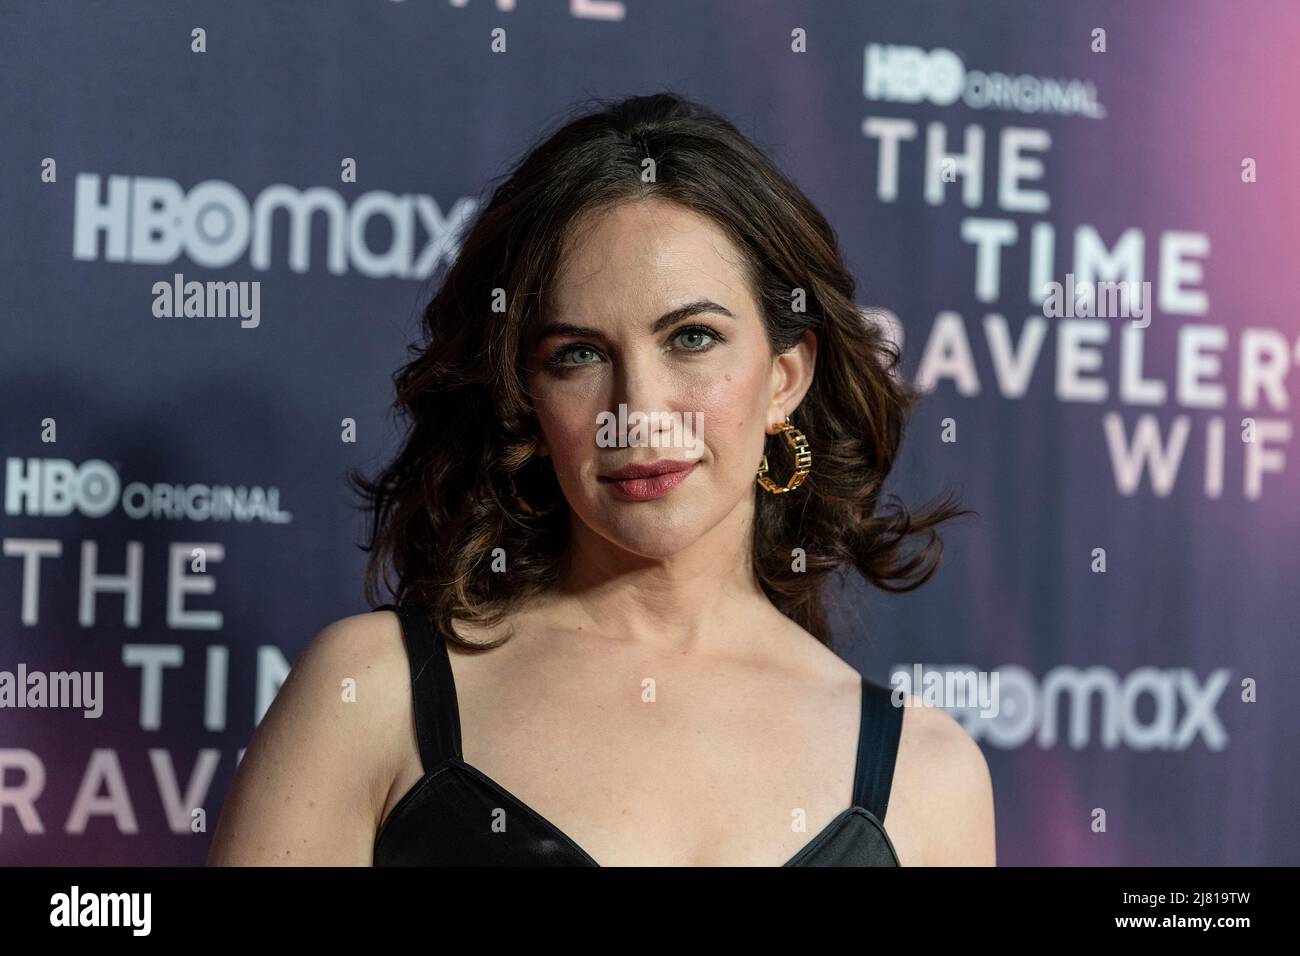 New York, USA. 11th May, 2022. Kate Siegel wearing dress by John Galliano attends HBO's The Time Traveler's Wife premiere at Morgan Library in New York on May 11, 2022. (Photo by Lev Radin/Sipa USA) Credit: Sipa USA/Alamy Live News Stock Photo